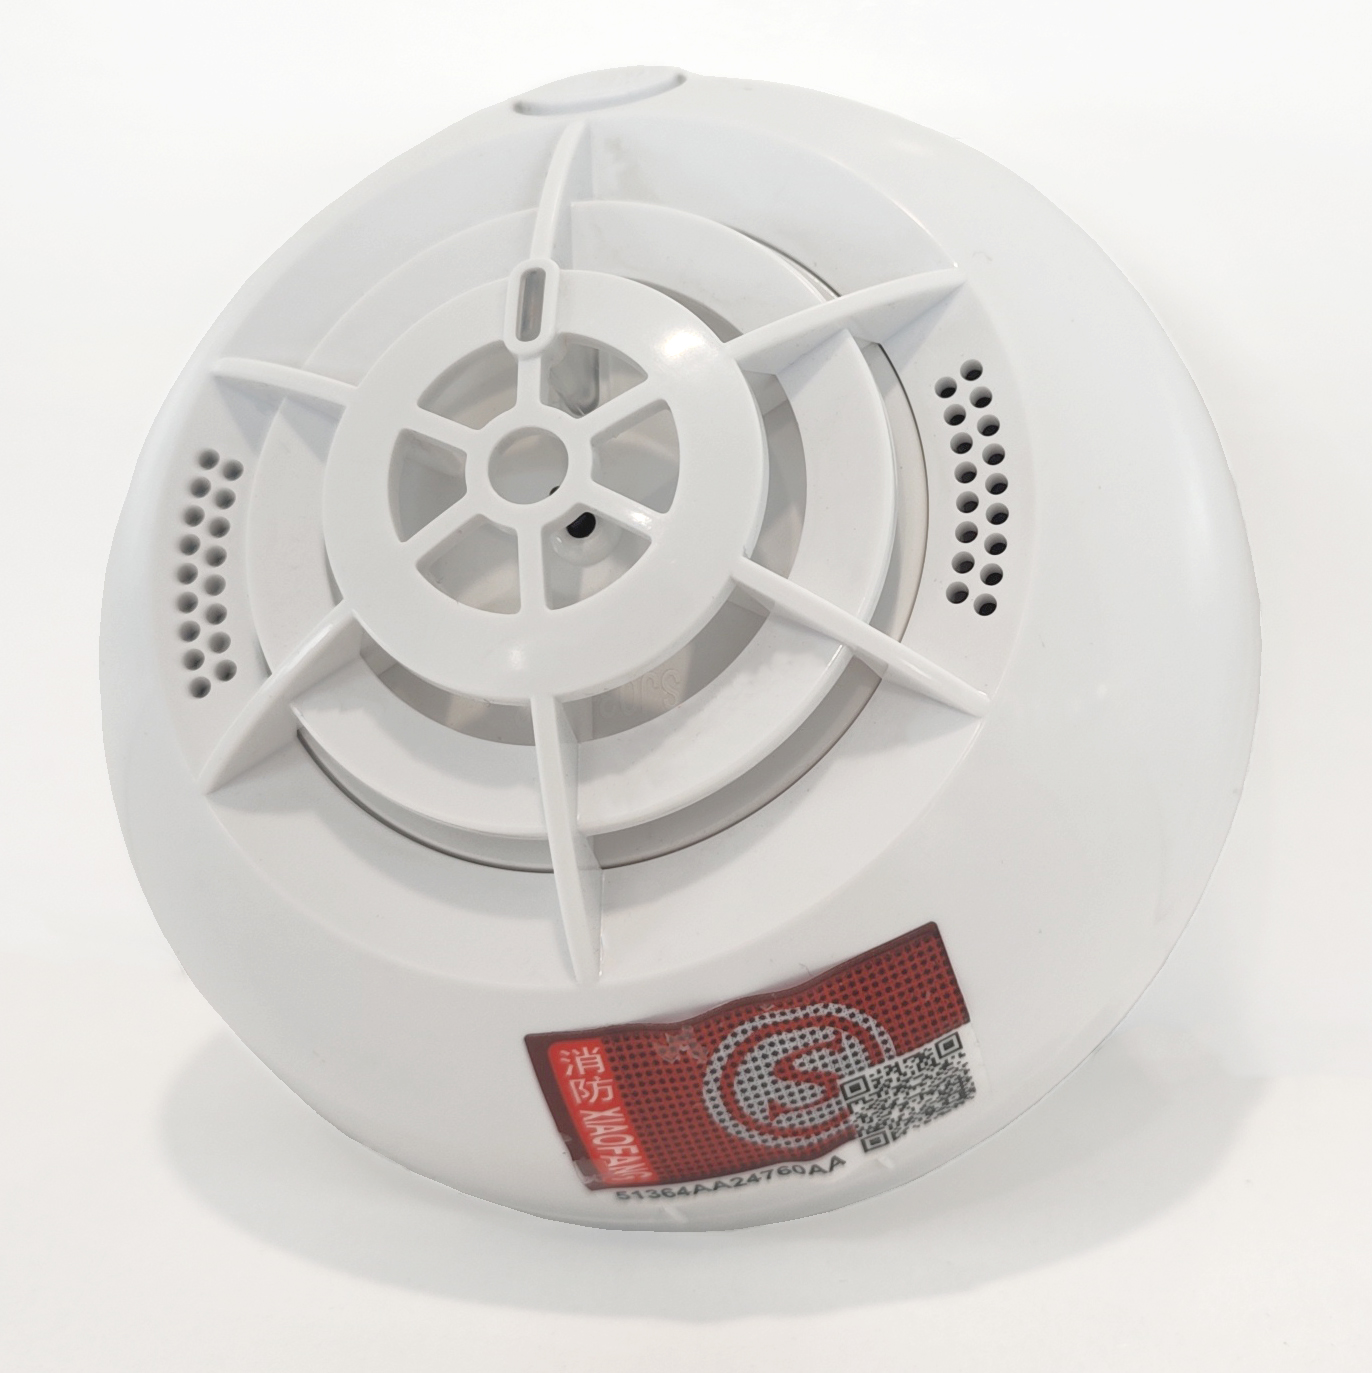 Integrating Detector Smoke Alarms into Your Smart Home System